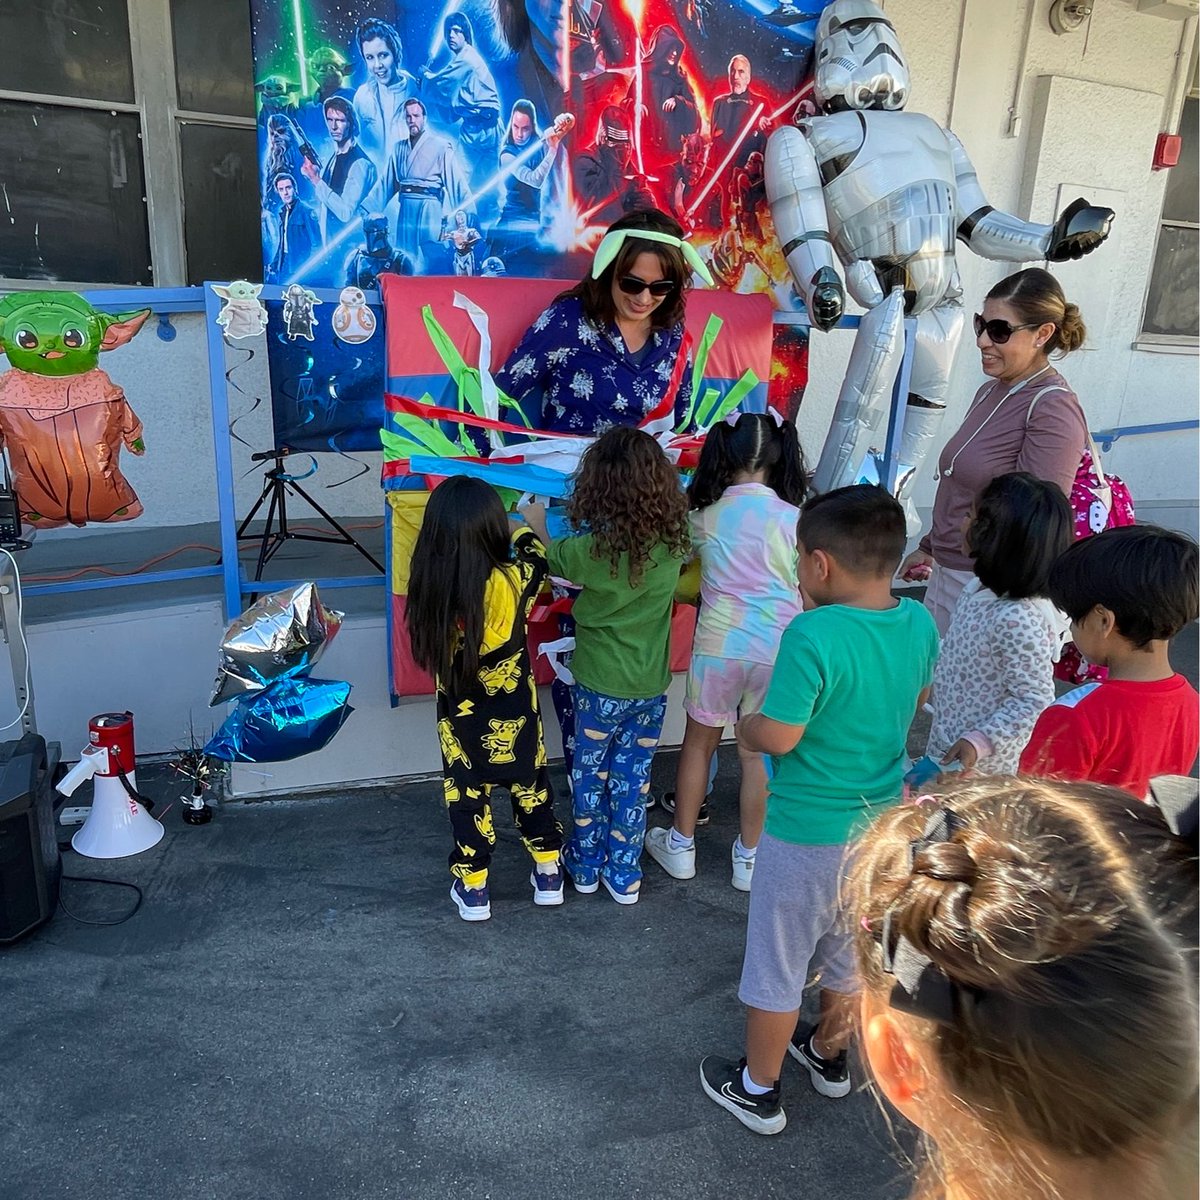 Duct Tape the Principal Event was a hit! Music, dancing, and being silly with Mrs. Valenzuela was priceless. Thank you for demonstrating positive attendance! #theforceisstrongatworkmanelementaryschool #workmanwolverinepride  #schooliscool #proudtobehlpusd